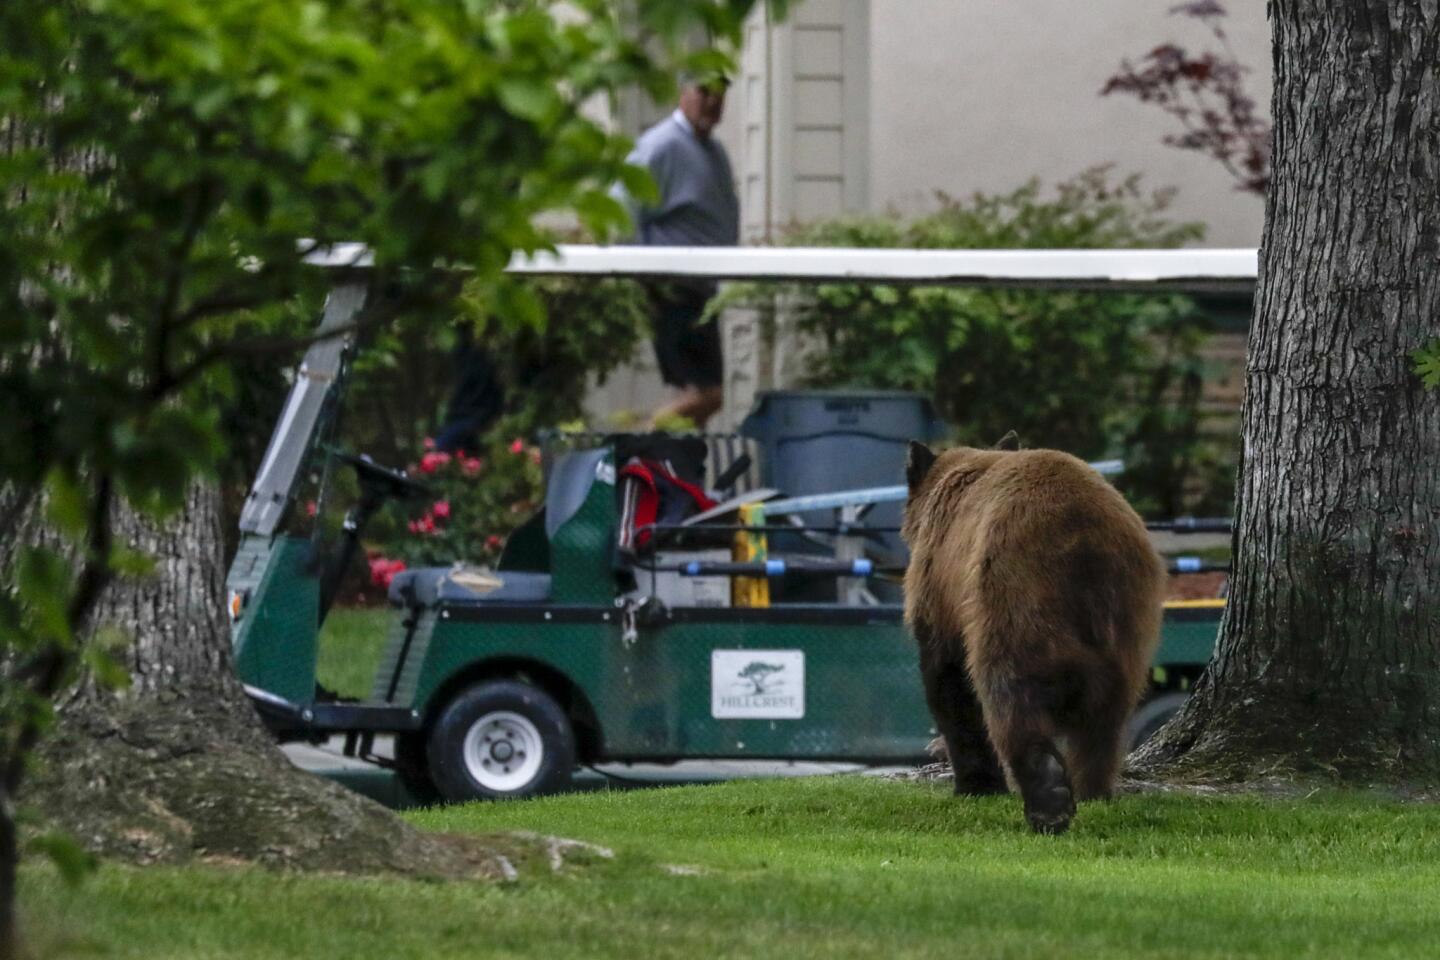 A bear wanders into the Hillcrest retirement community in La Verne.